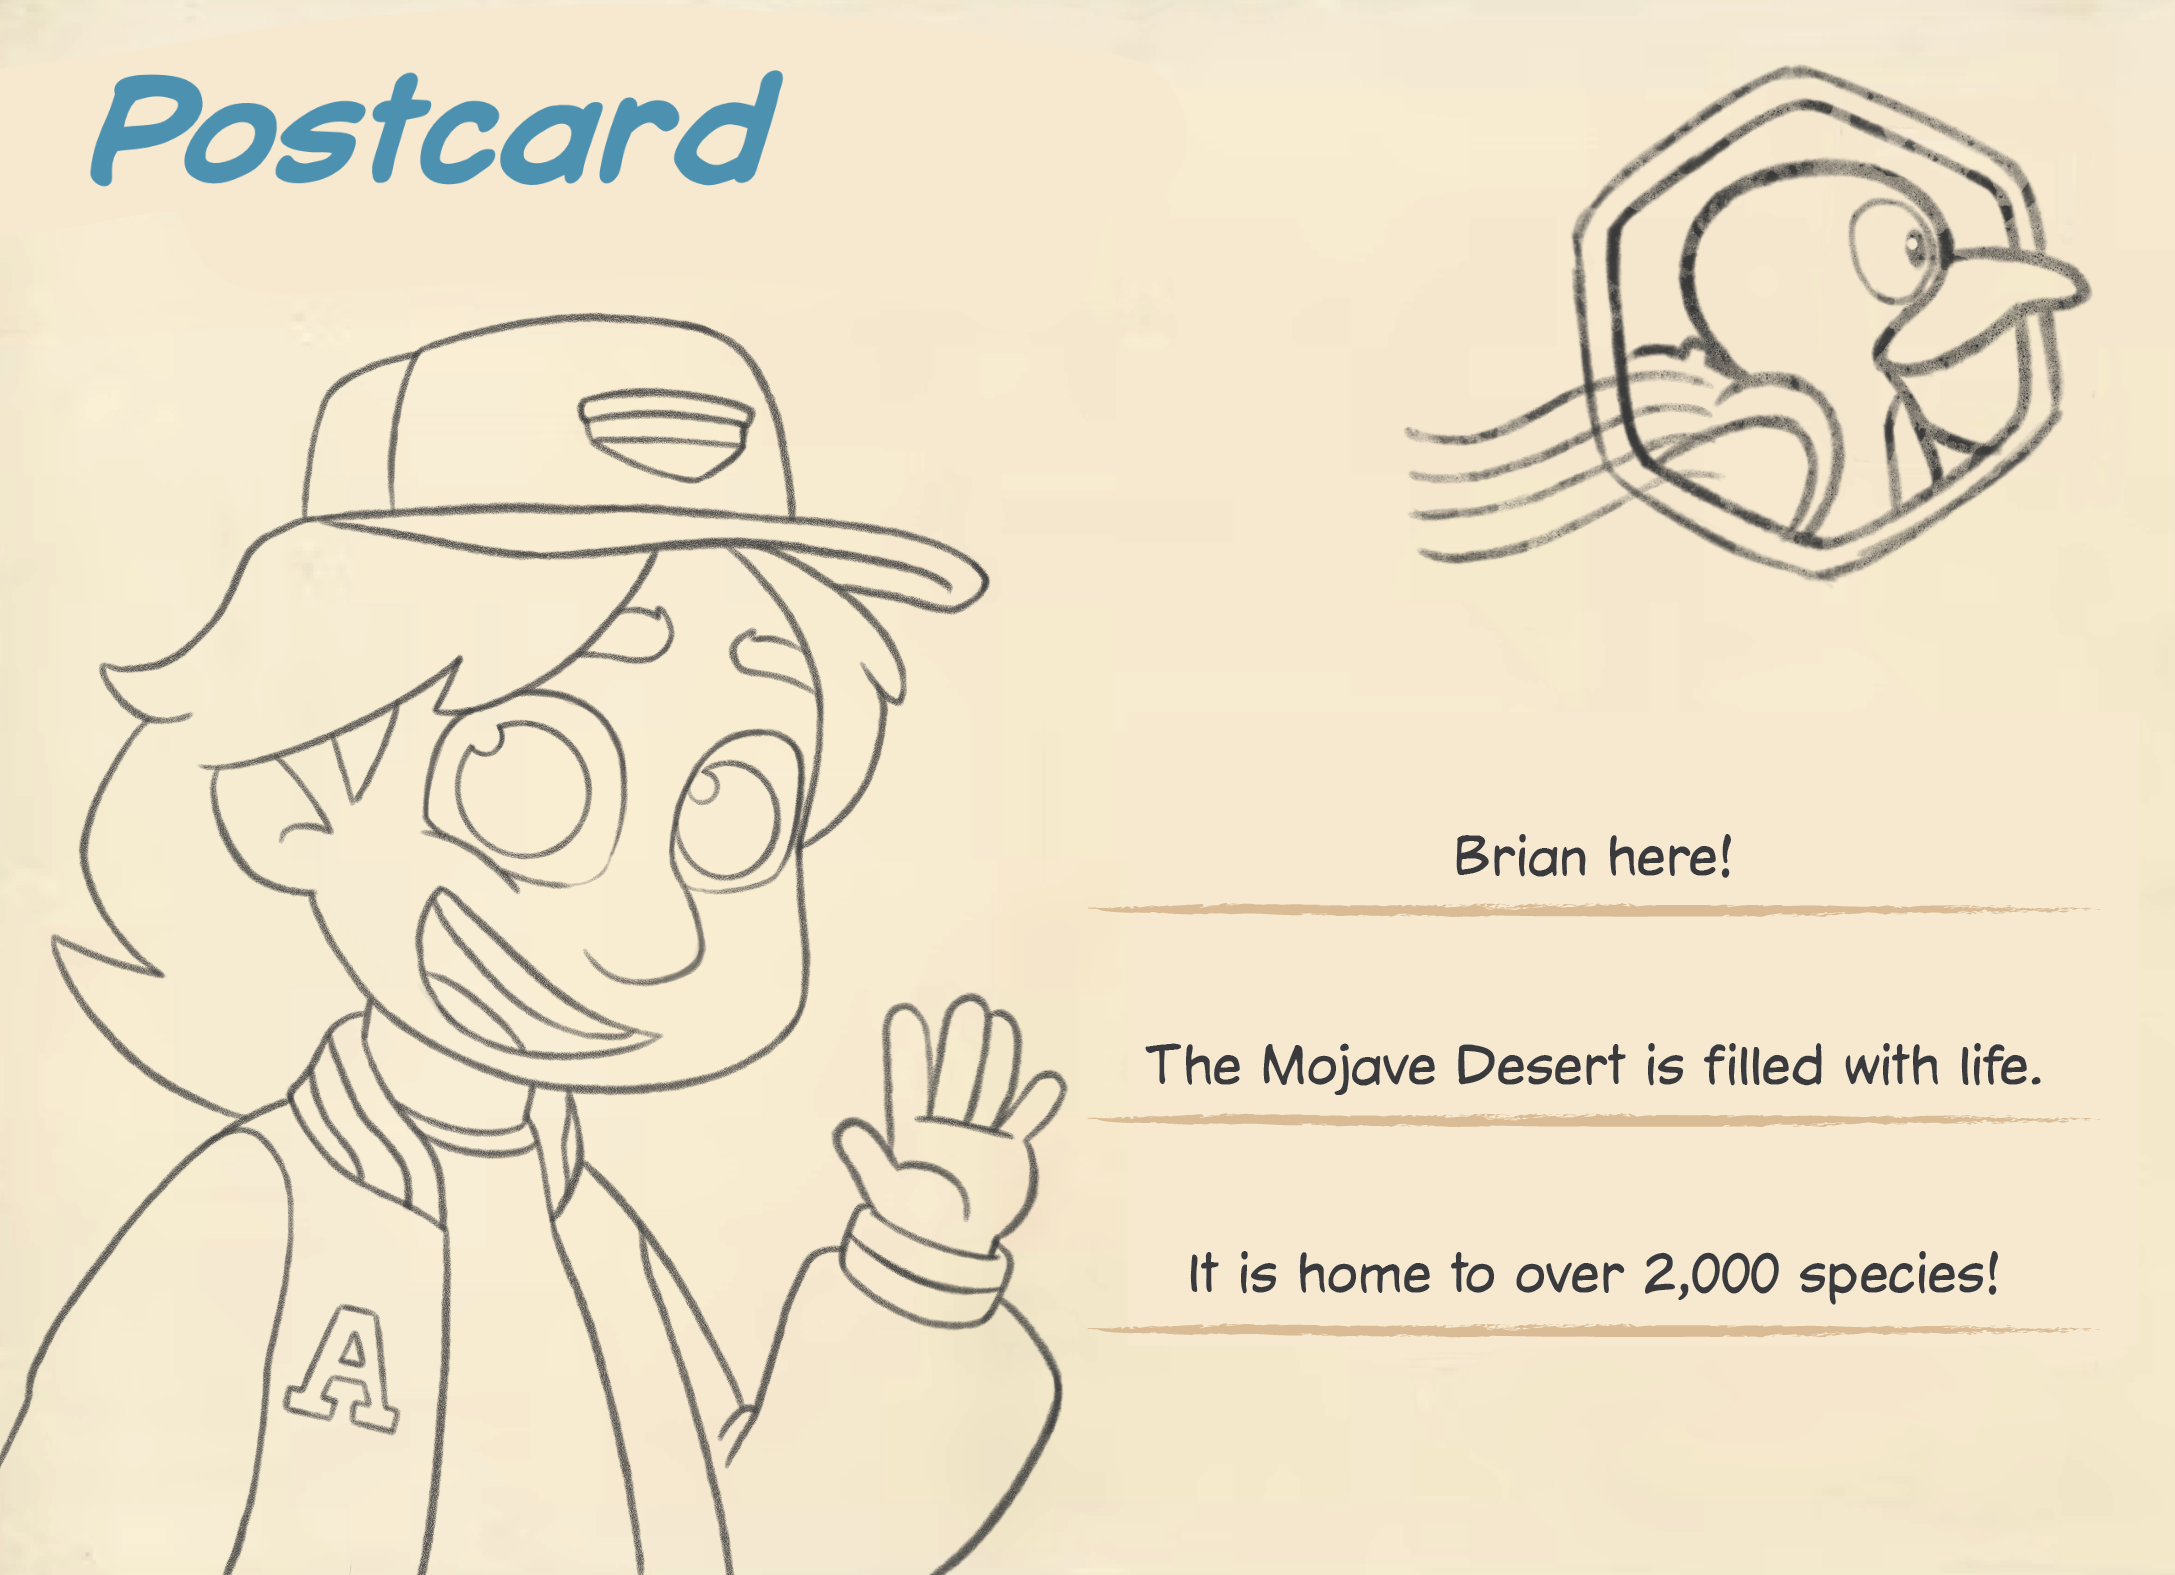 A postcard with Brian here!  The Mojave Desert is filled with life. It is home to over 2000 species! written on it